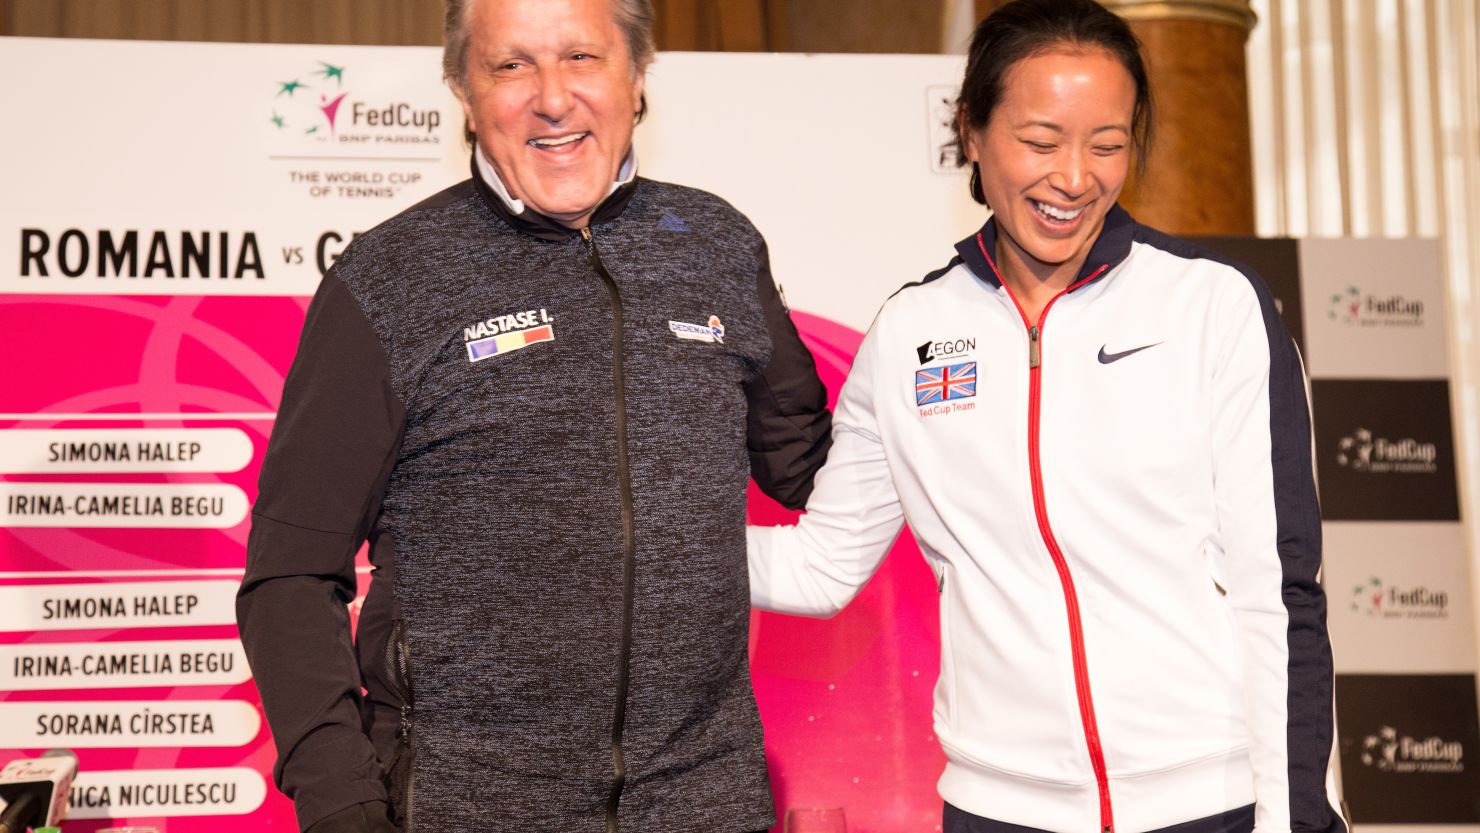 Ilie Nastase and Anne Keothavong ahead of Romania's Fed Cup tie with Great Britain.